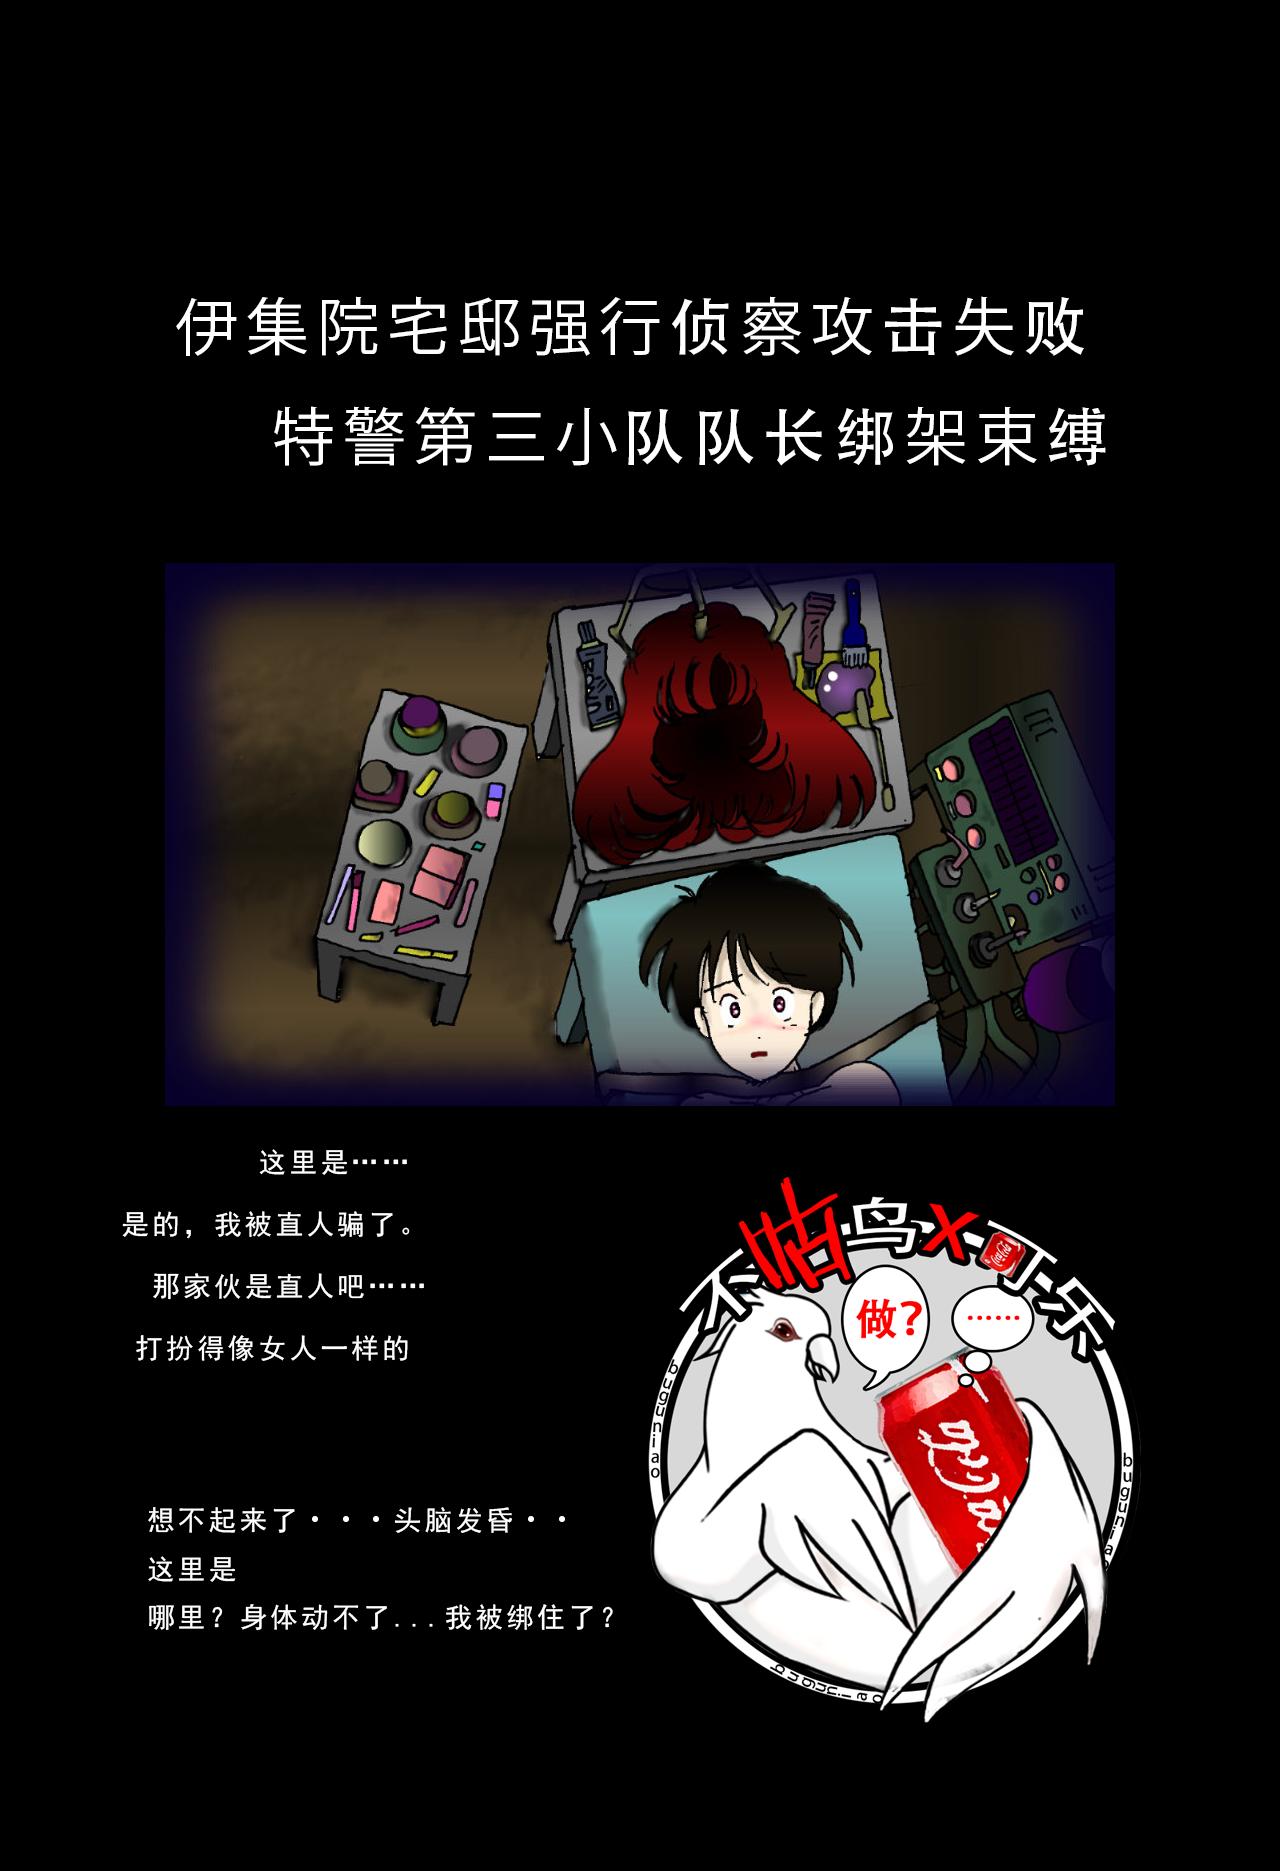 Special Police Third Platoon Captain Abduction Restraint Edition【chinese】 1